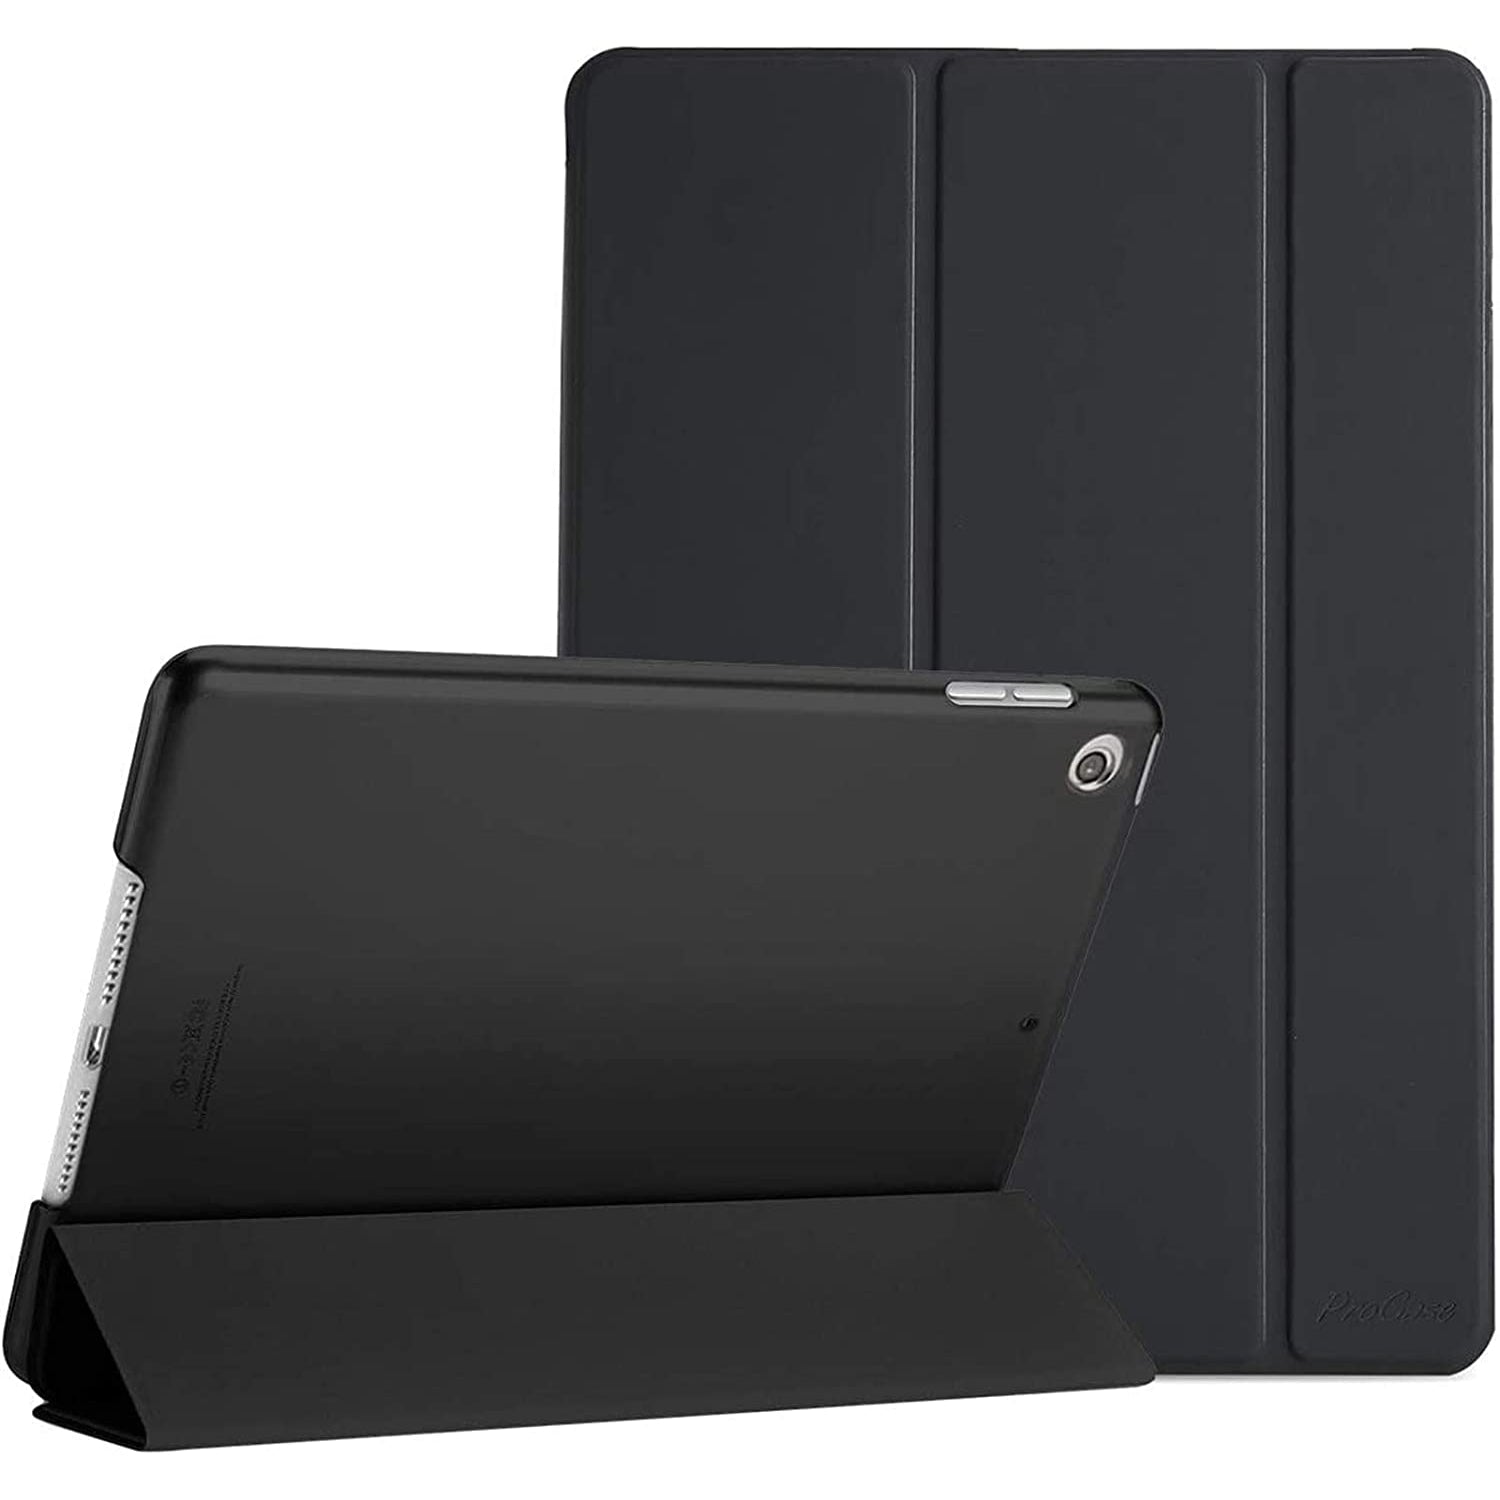 ProCase for iPad Air 10.2 inch - Black